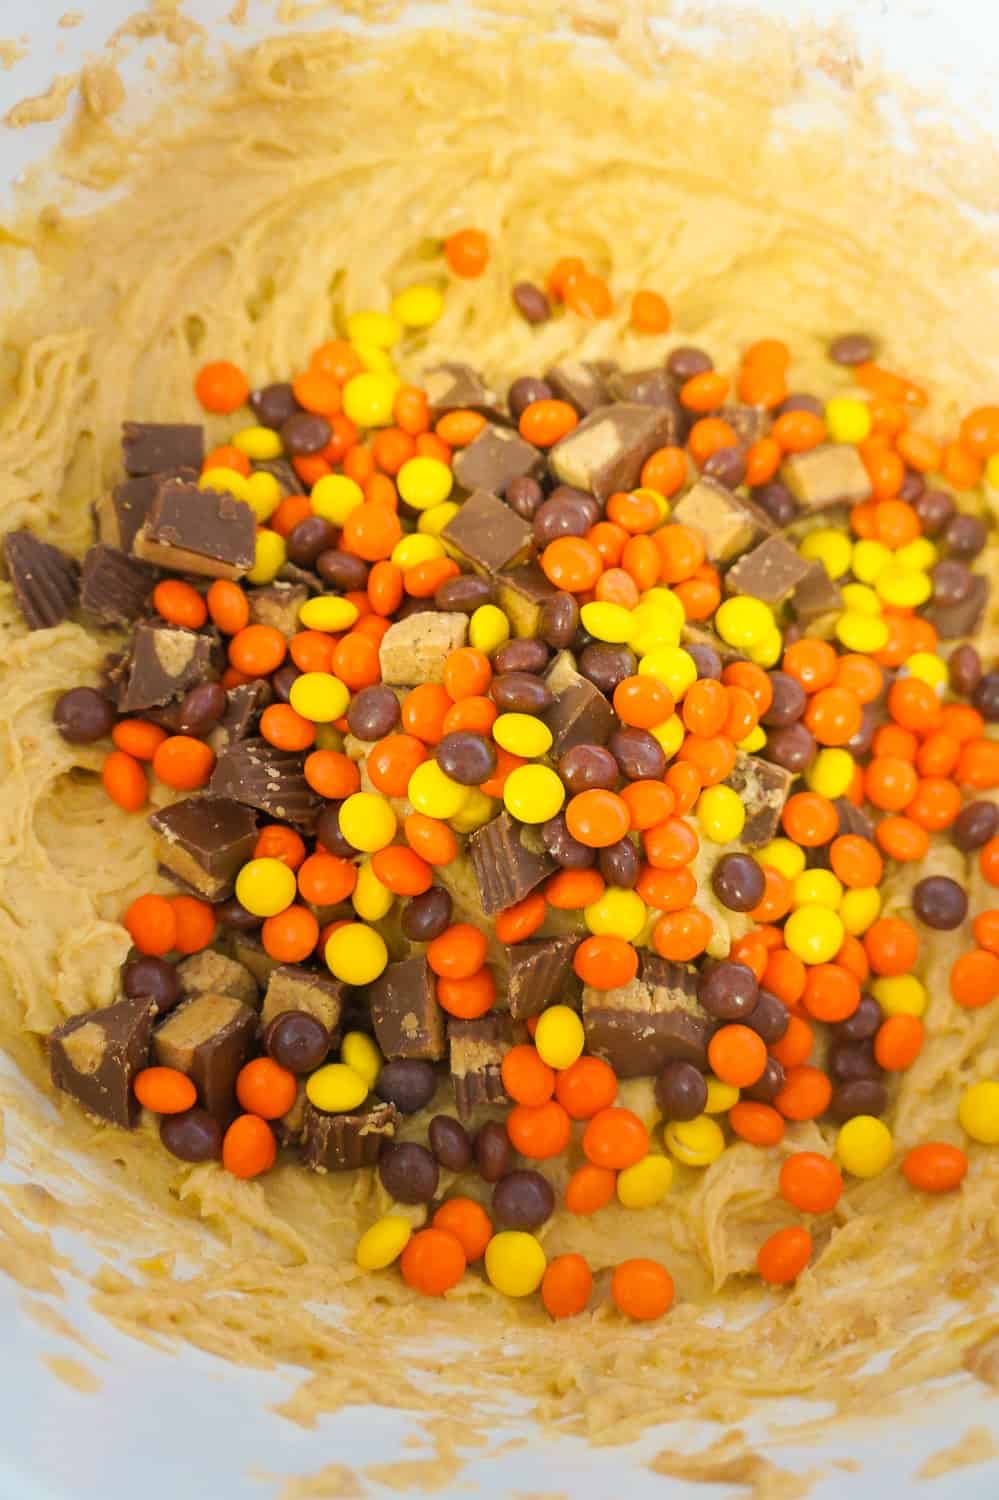 mini Reese's Pieces in peanut butter banana cake batter